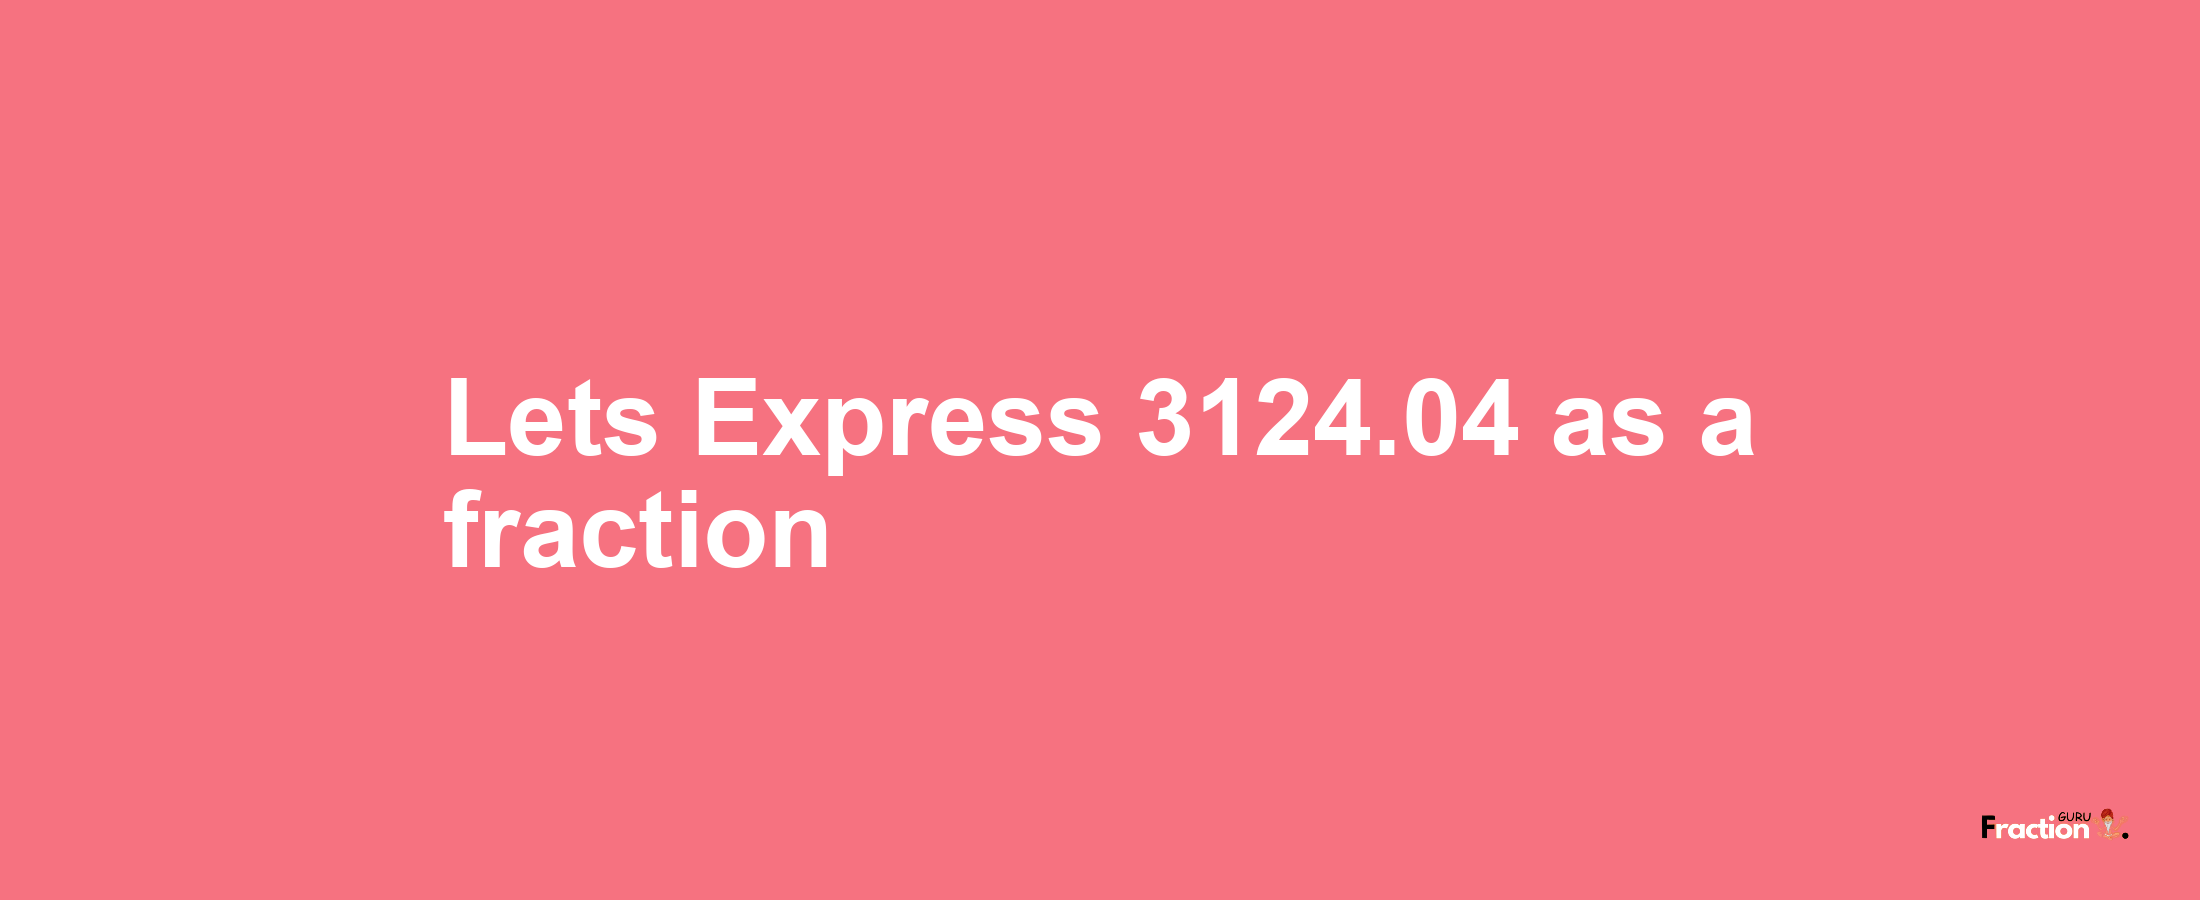 Lets Express 3124.04 as afraction